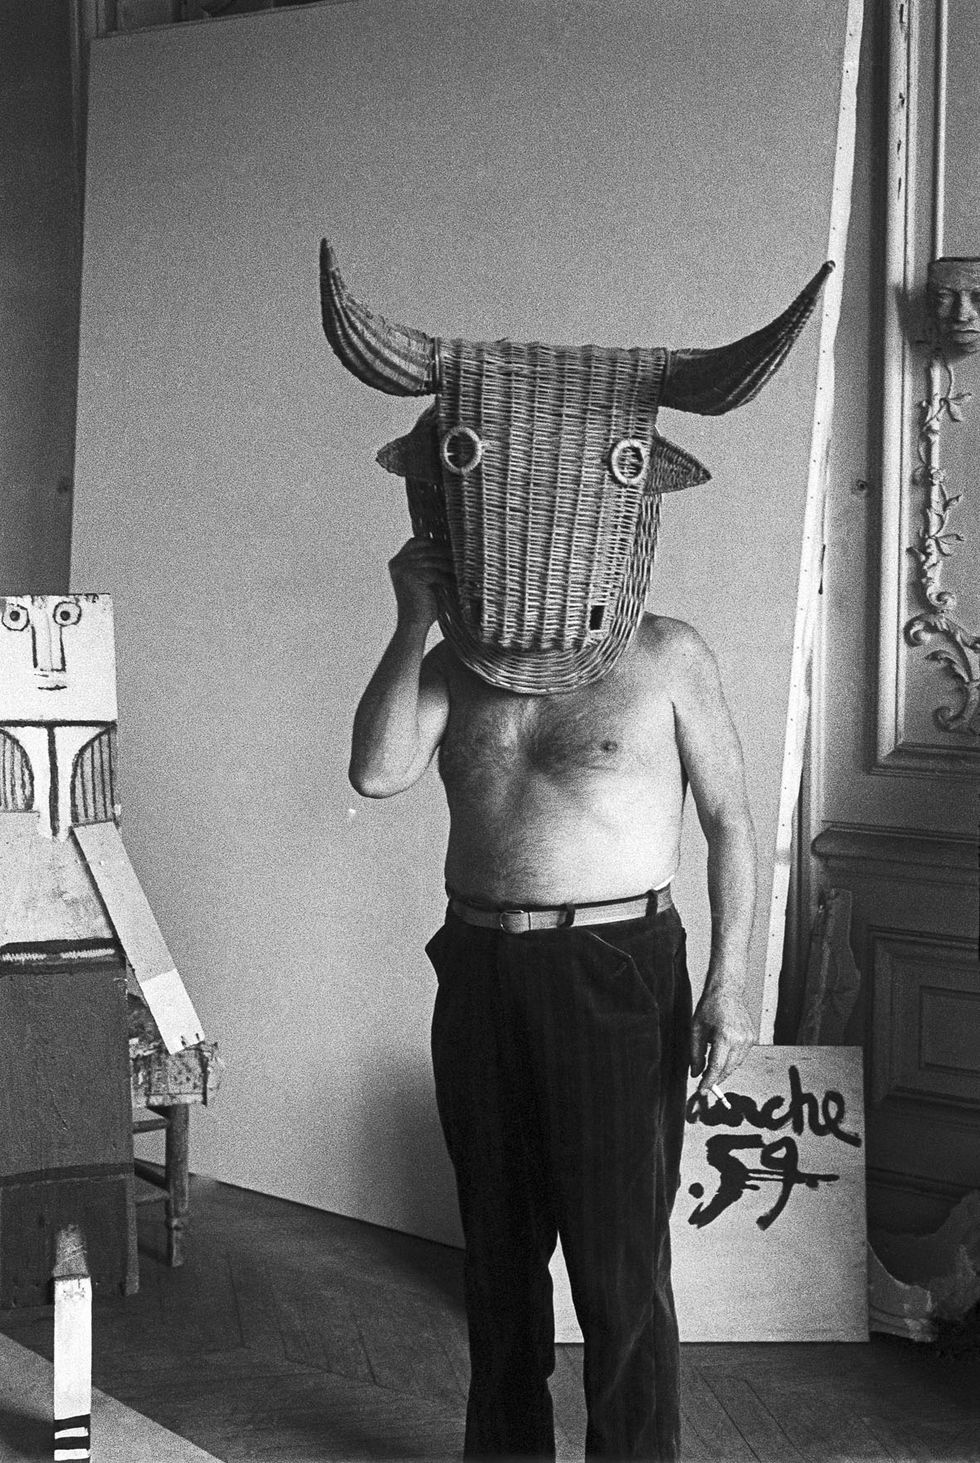 pablo picasso with a wicker bull mask originally intended for bullfighters' training, he becomes a living minotaur beside him is a sculpture made of scrap wood with the features painted on it la californie, cannes 1959